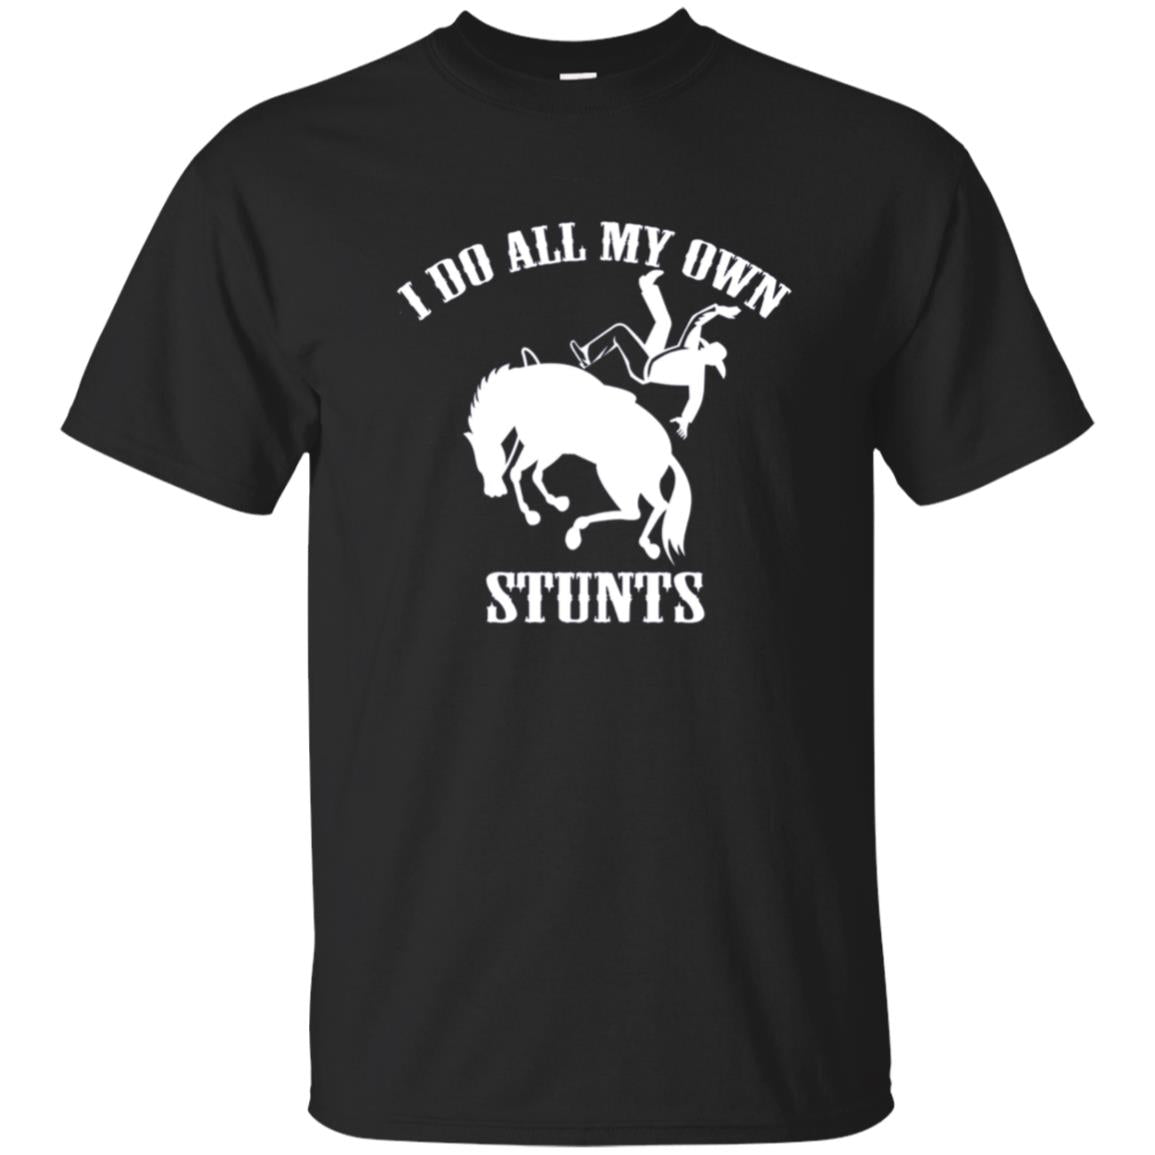 Funny Horse Riding Tee I Do All My Own Stunts T Shirt